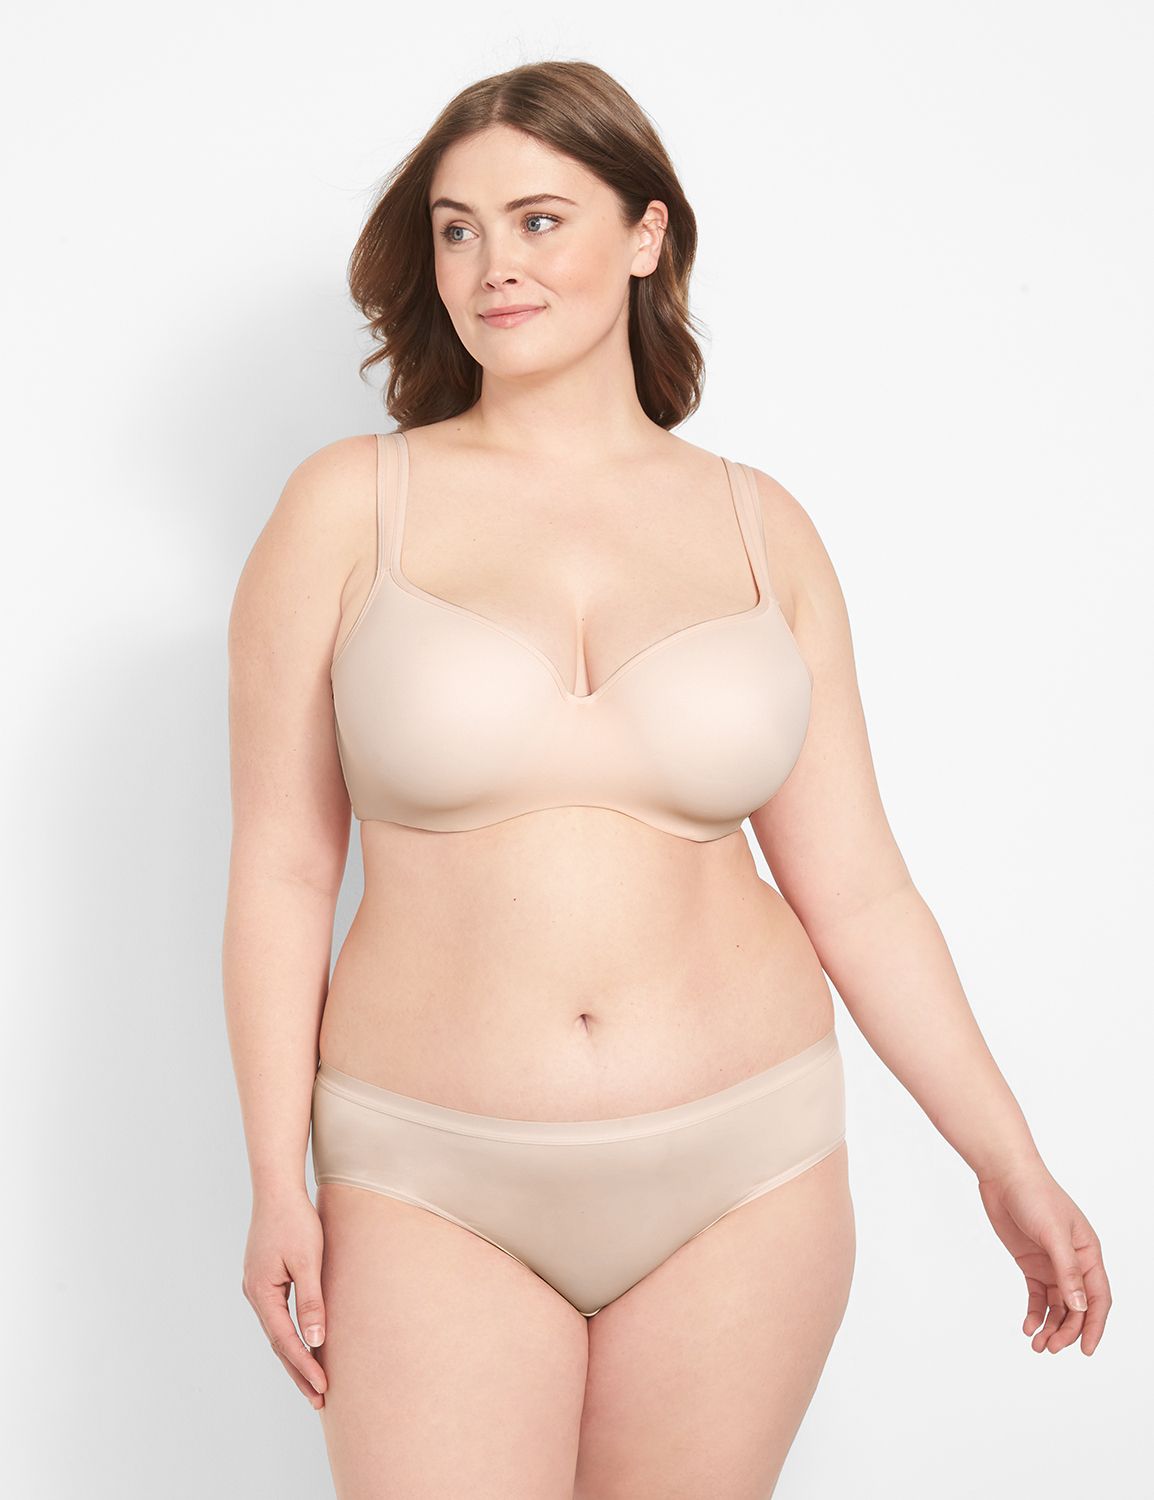 Miss Demure - Plunge bras are actually more comfortable for women